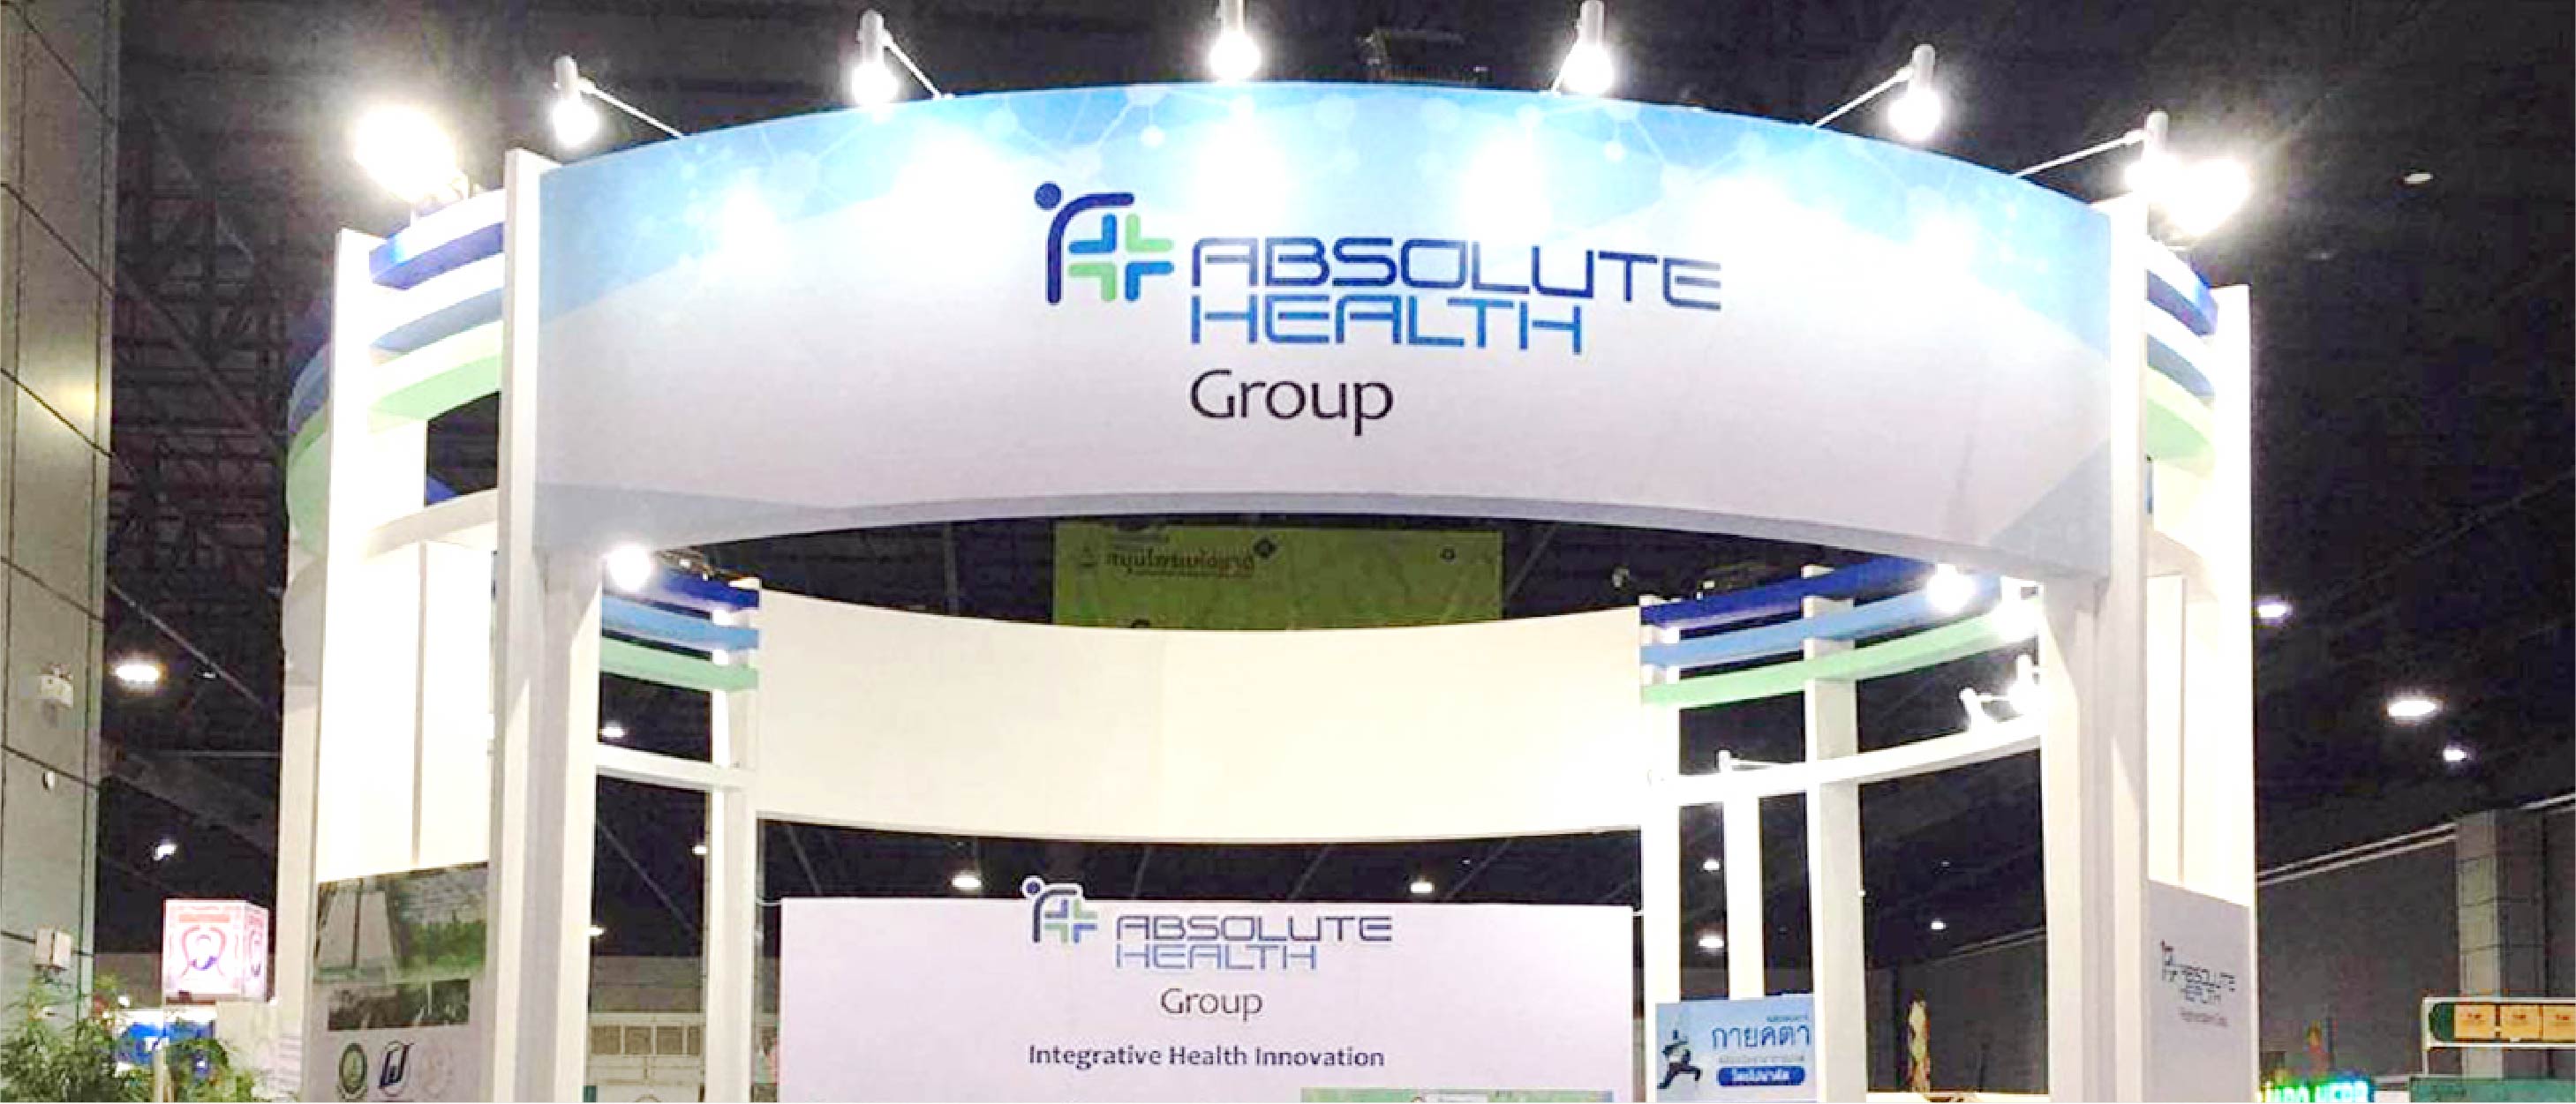 Absolute Health Group – A Leadership in Integrative Healthcare.